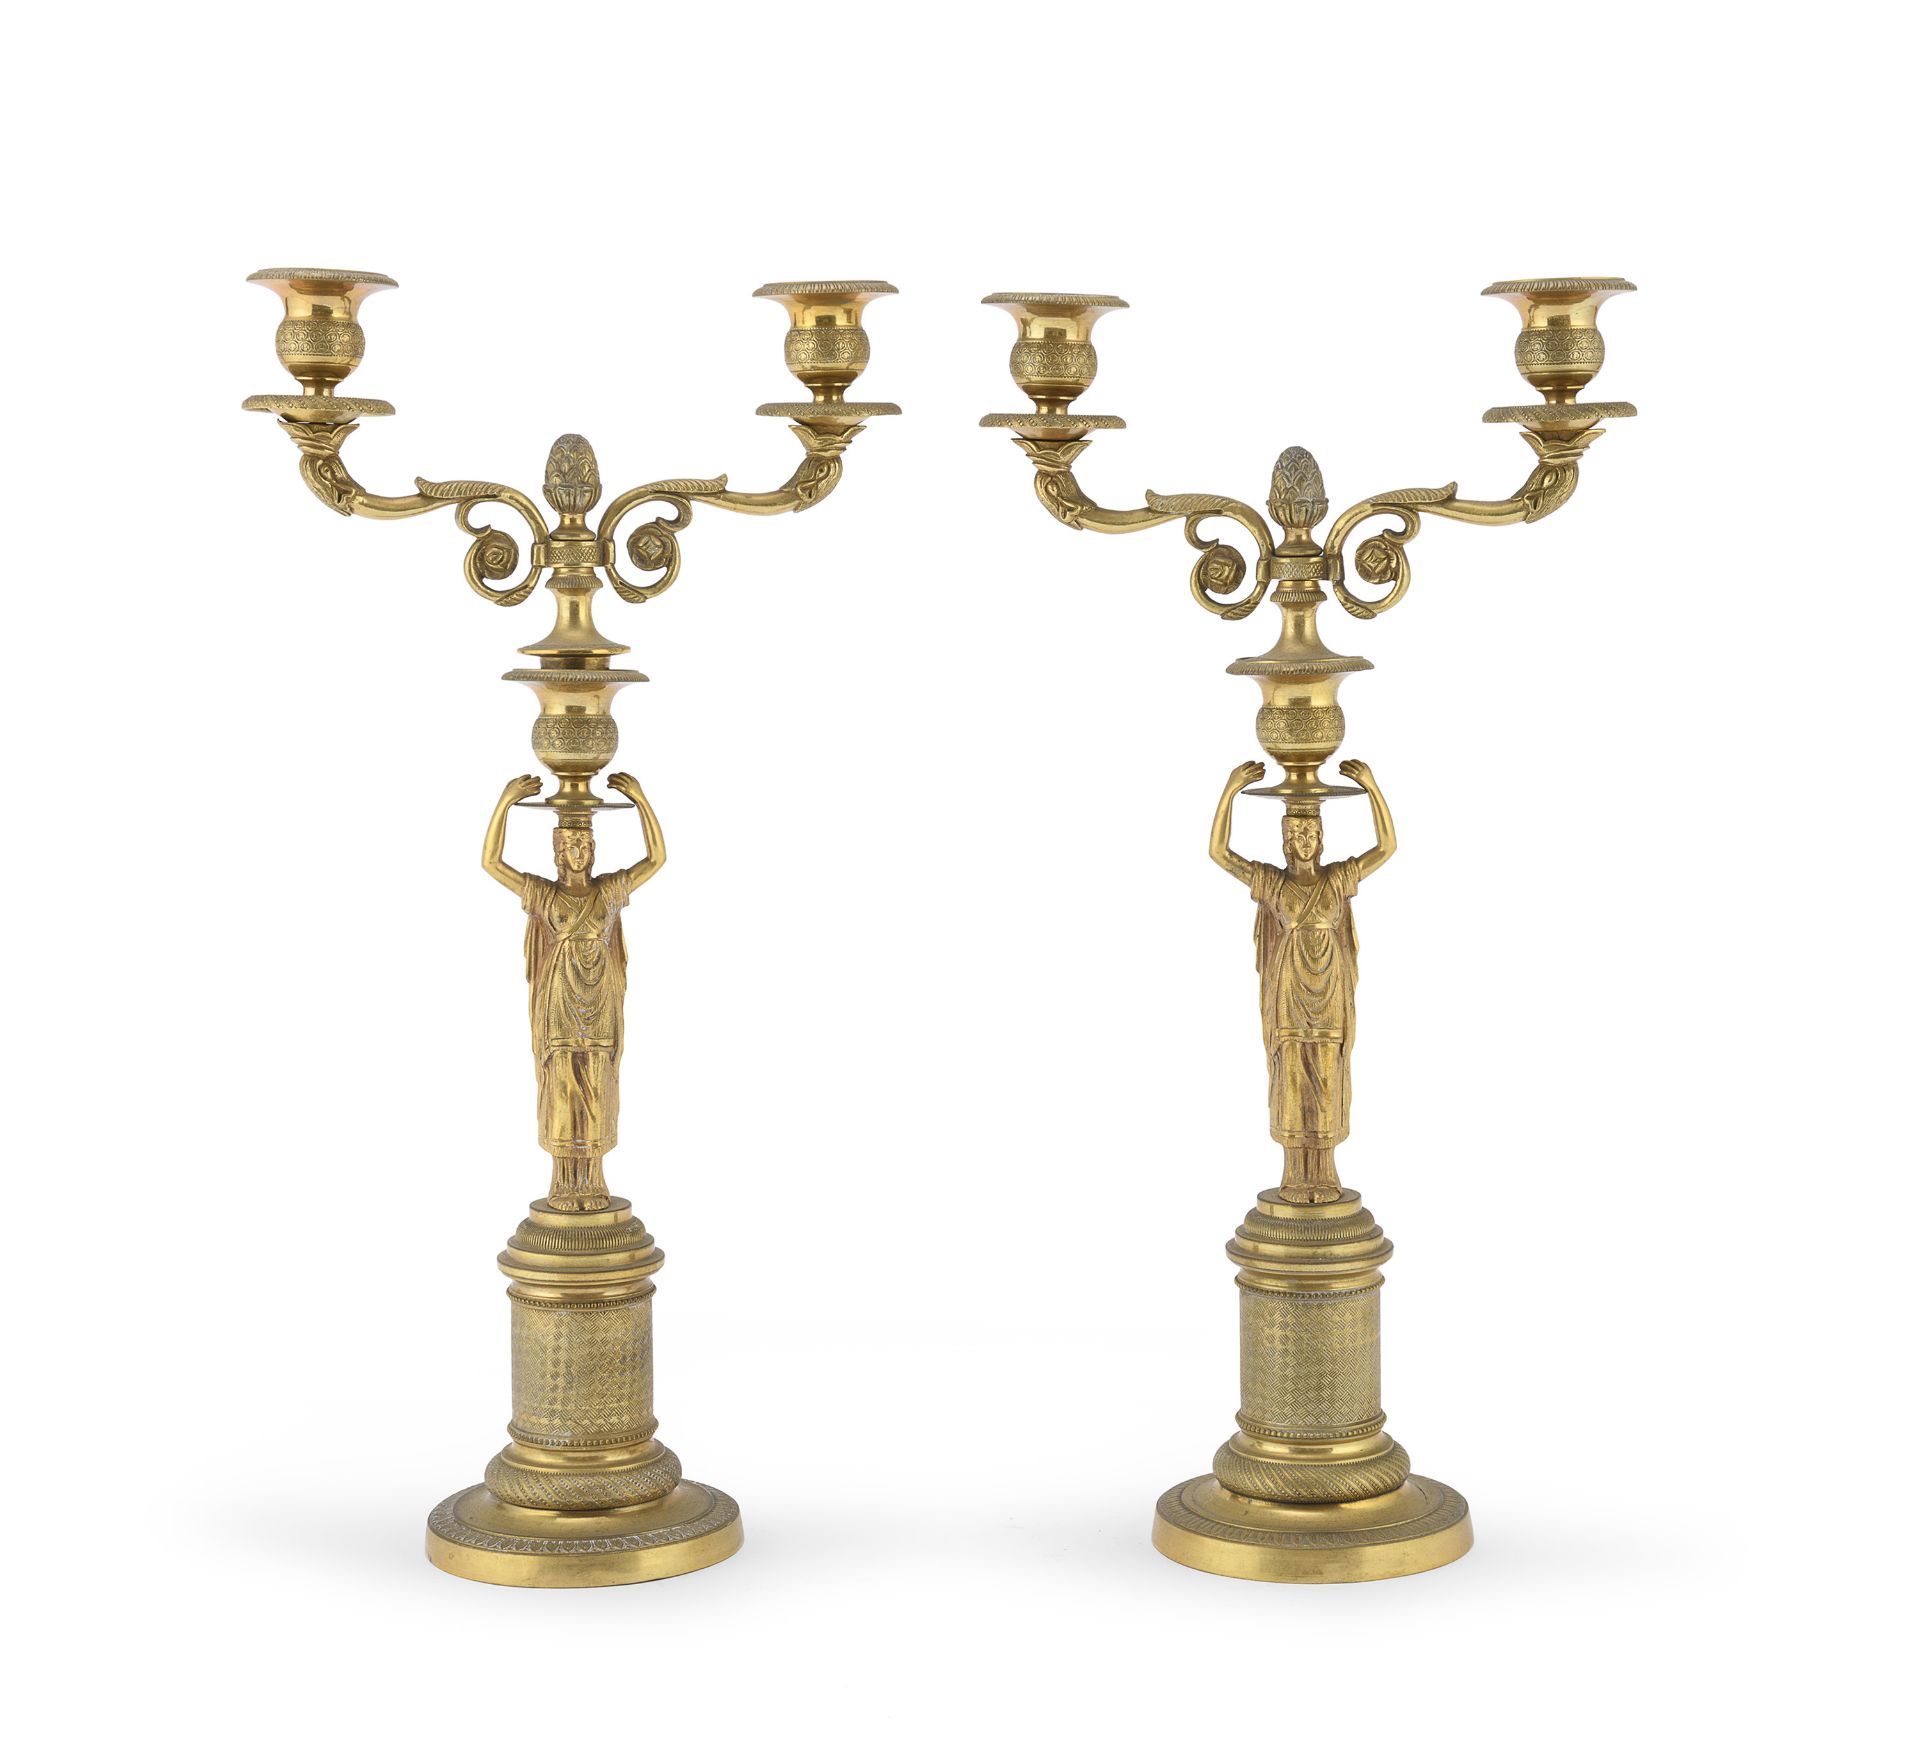 PAIR OF SMALL GILT BRONZE TWO-BRANCHED CANDLESTICKS 19TH CENTURY